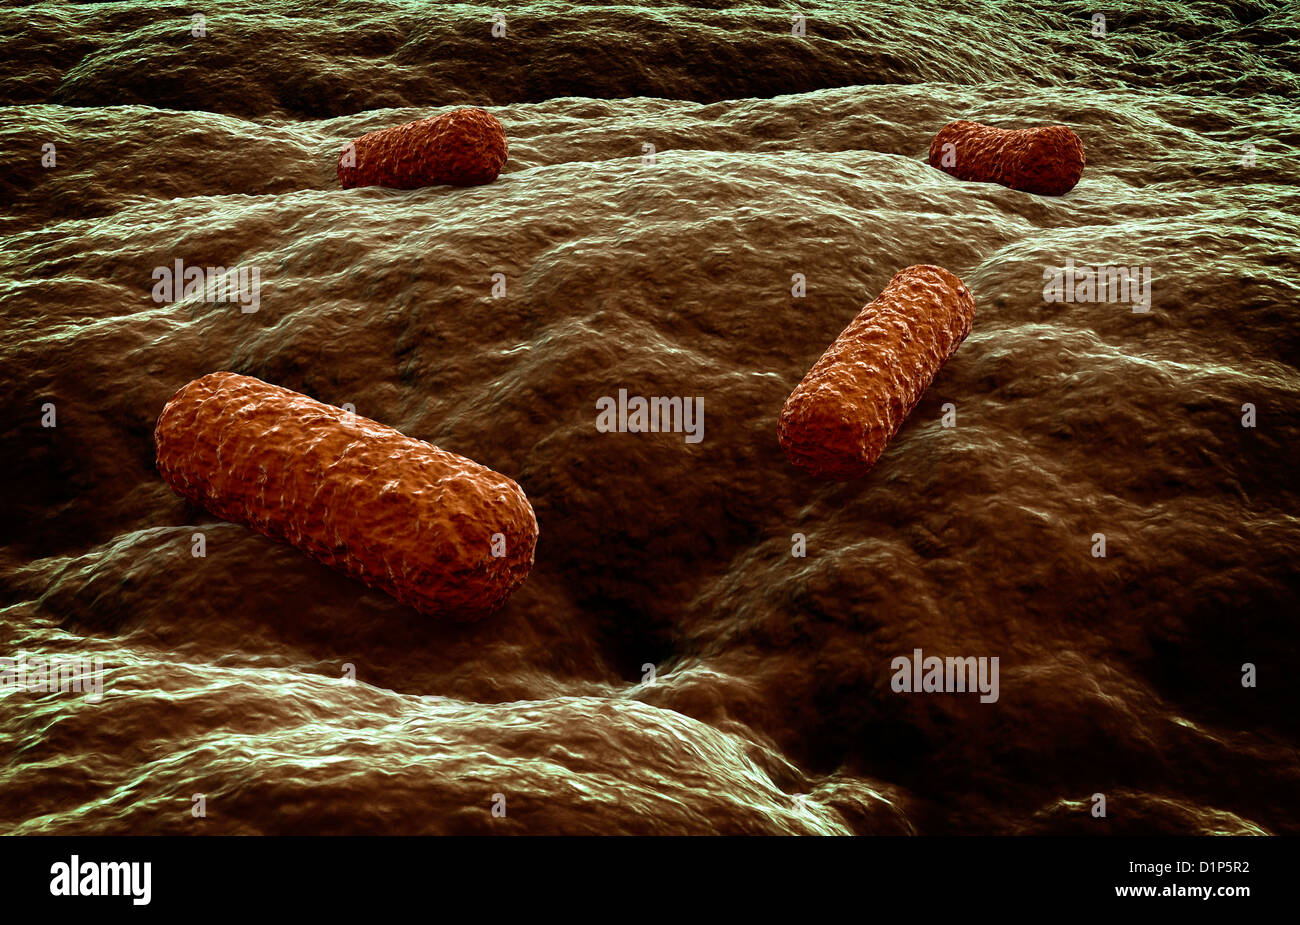 Bacterial infection, artwork Stock Photo